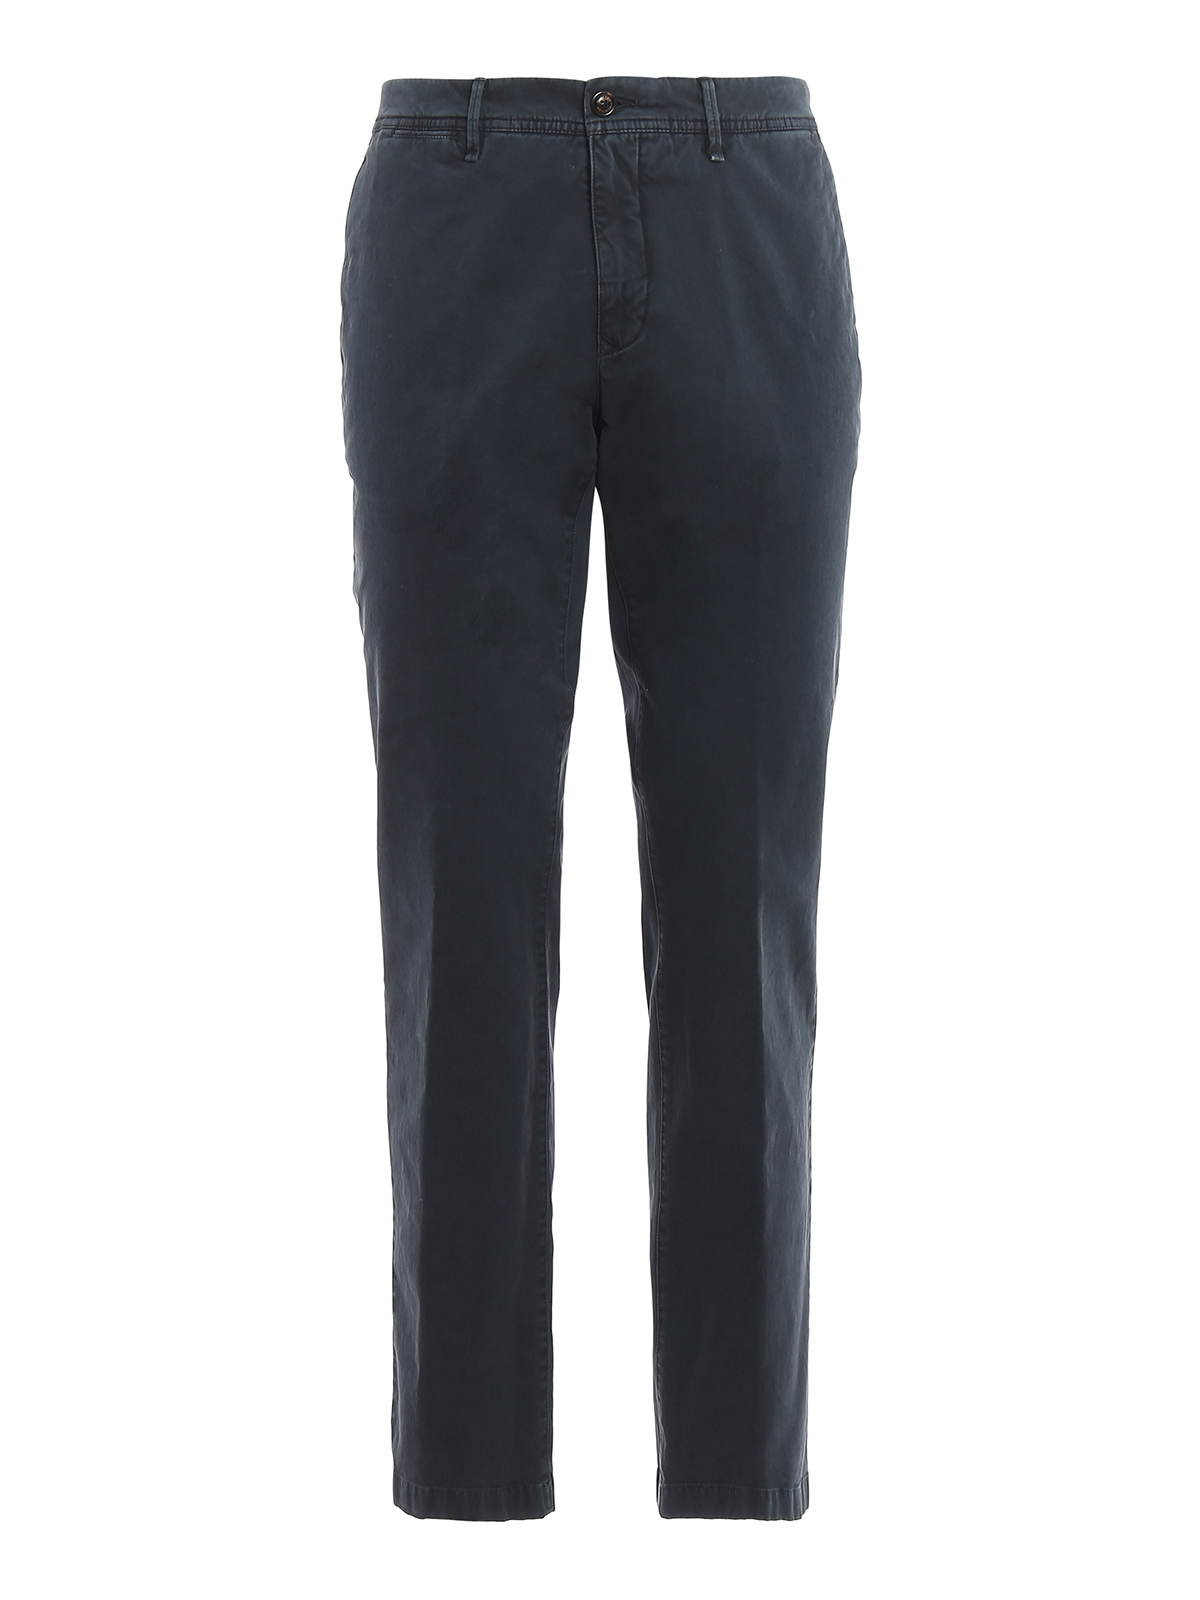 MONCLER BLUE COTTON TWILL CHINO TROUSERS